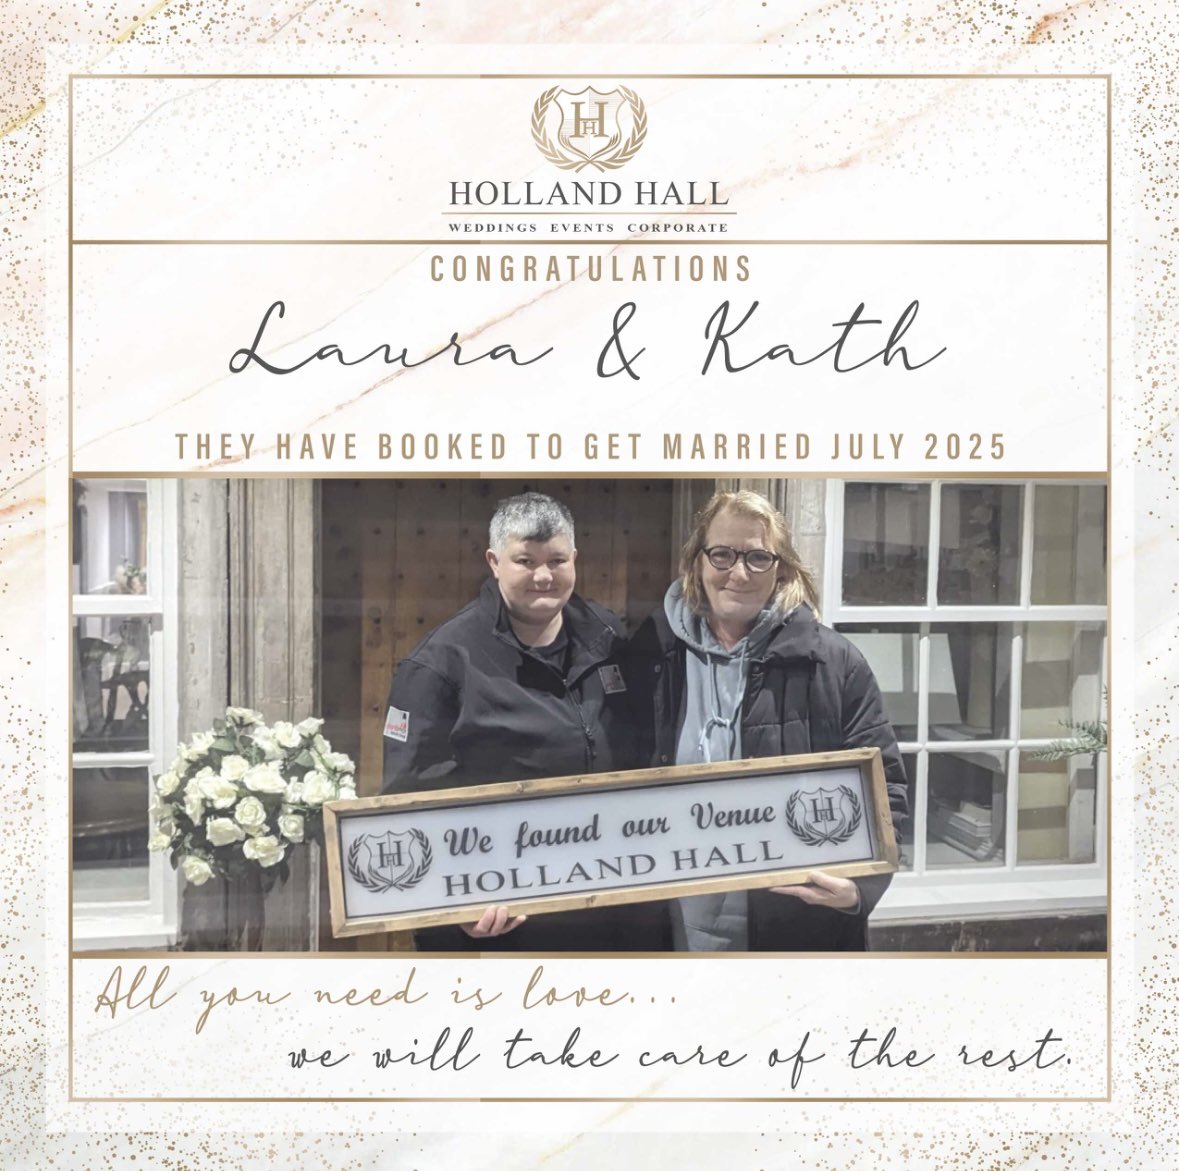 Congratulations Laura & Kath! They have booked to get married July 2025! 🤍💗💒 

All you need is love…we will take care of the rest. ❤️😍🫶🏼

#Wedding2026 #DreamVenue #Love #bespokewedding #AllYouNeedIsLove #hiddengemofwestlancs 
#Wedding2024 #Wedding2025 #lancashirevenue